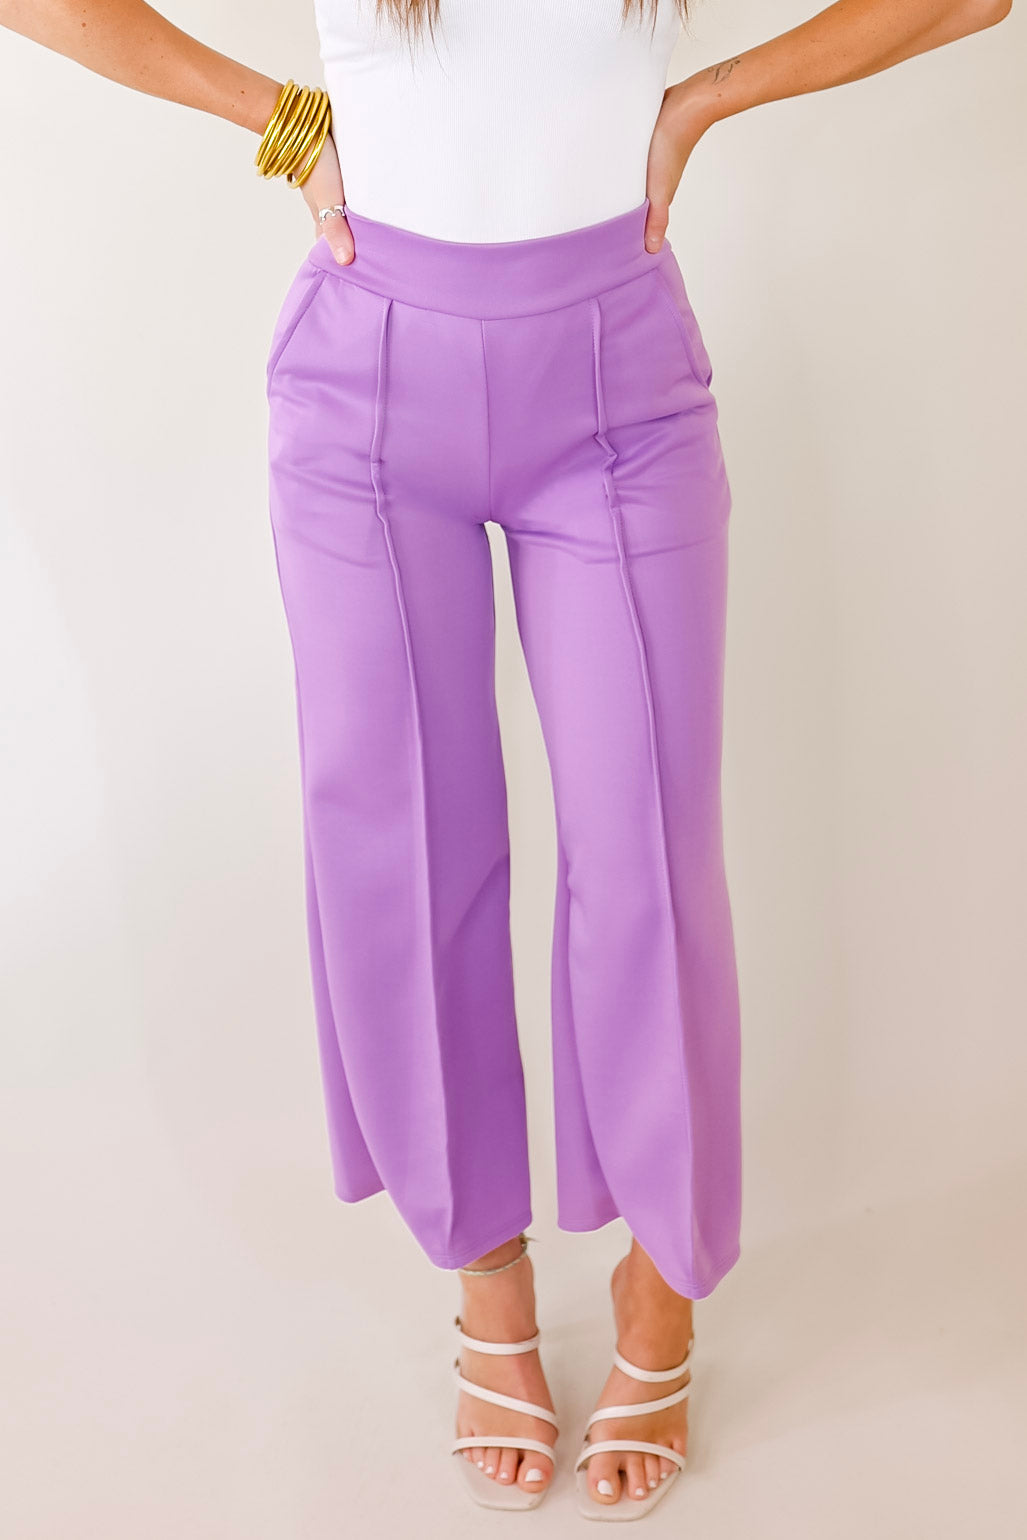 Do A Double Take Front Pleated Pants in Lavender Purple - Giddy Up Glamour Boutique